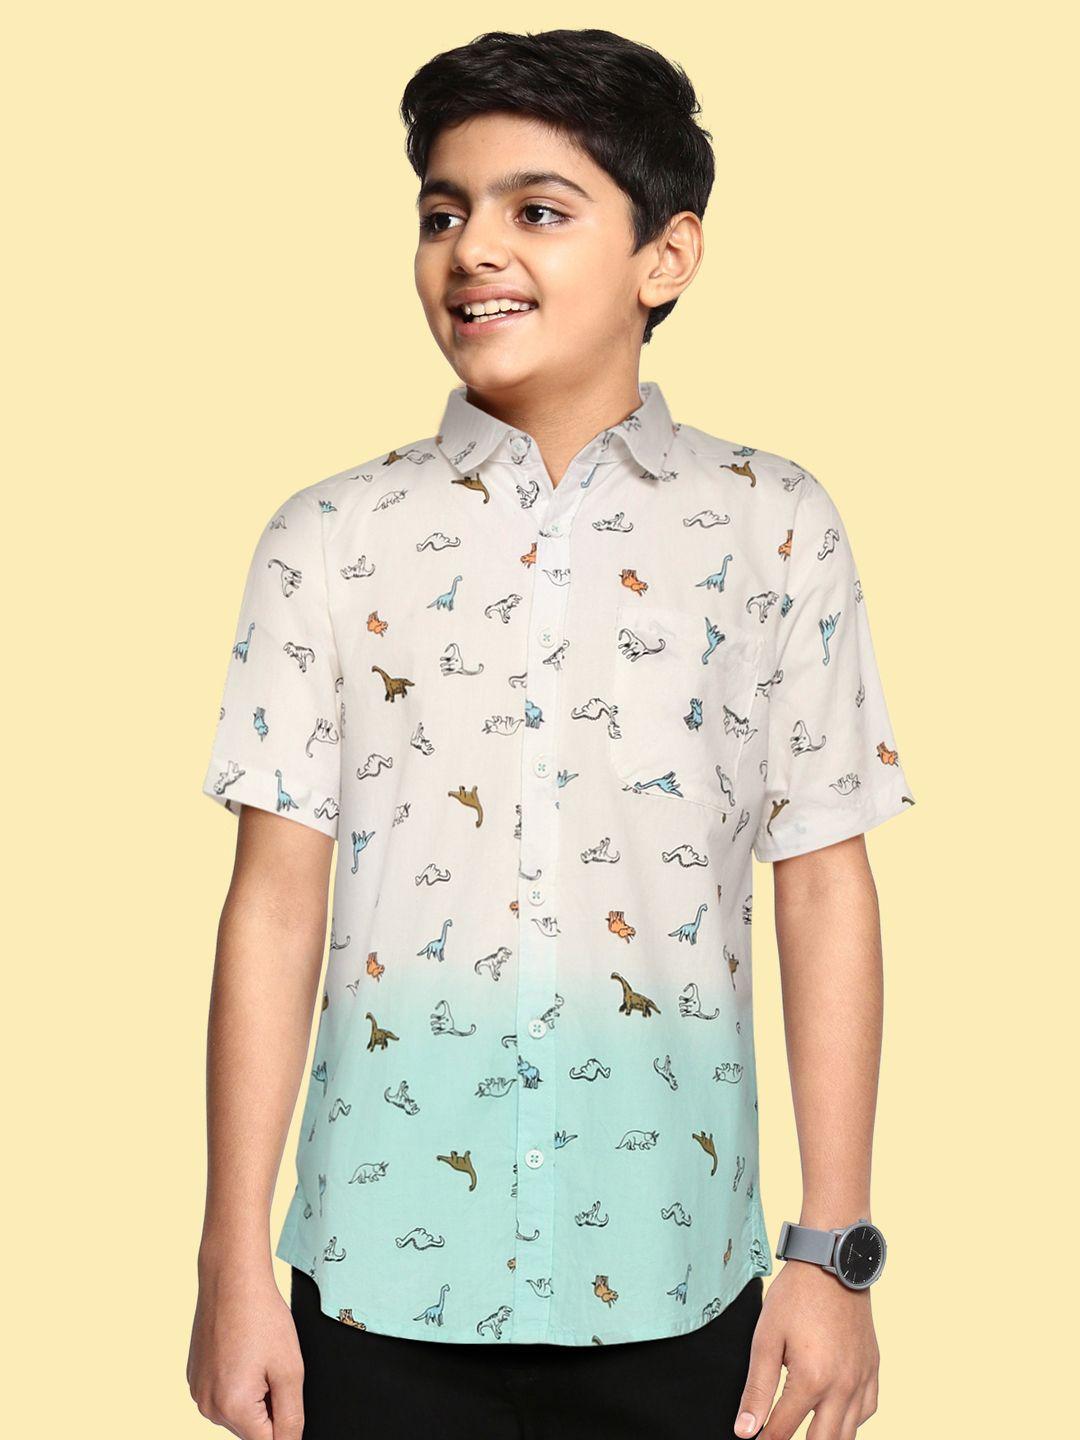 h by hamleys boys white & blue ombre conversational printed casual shirt